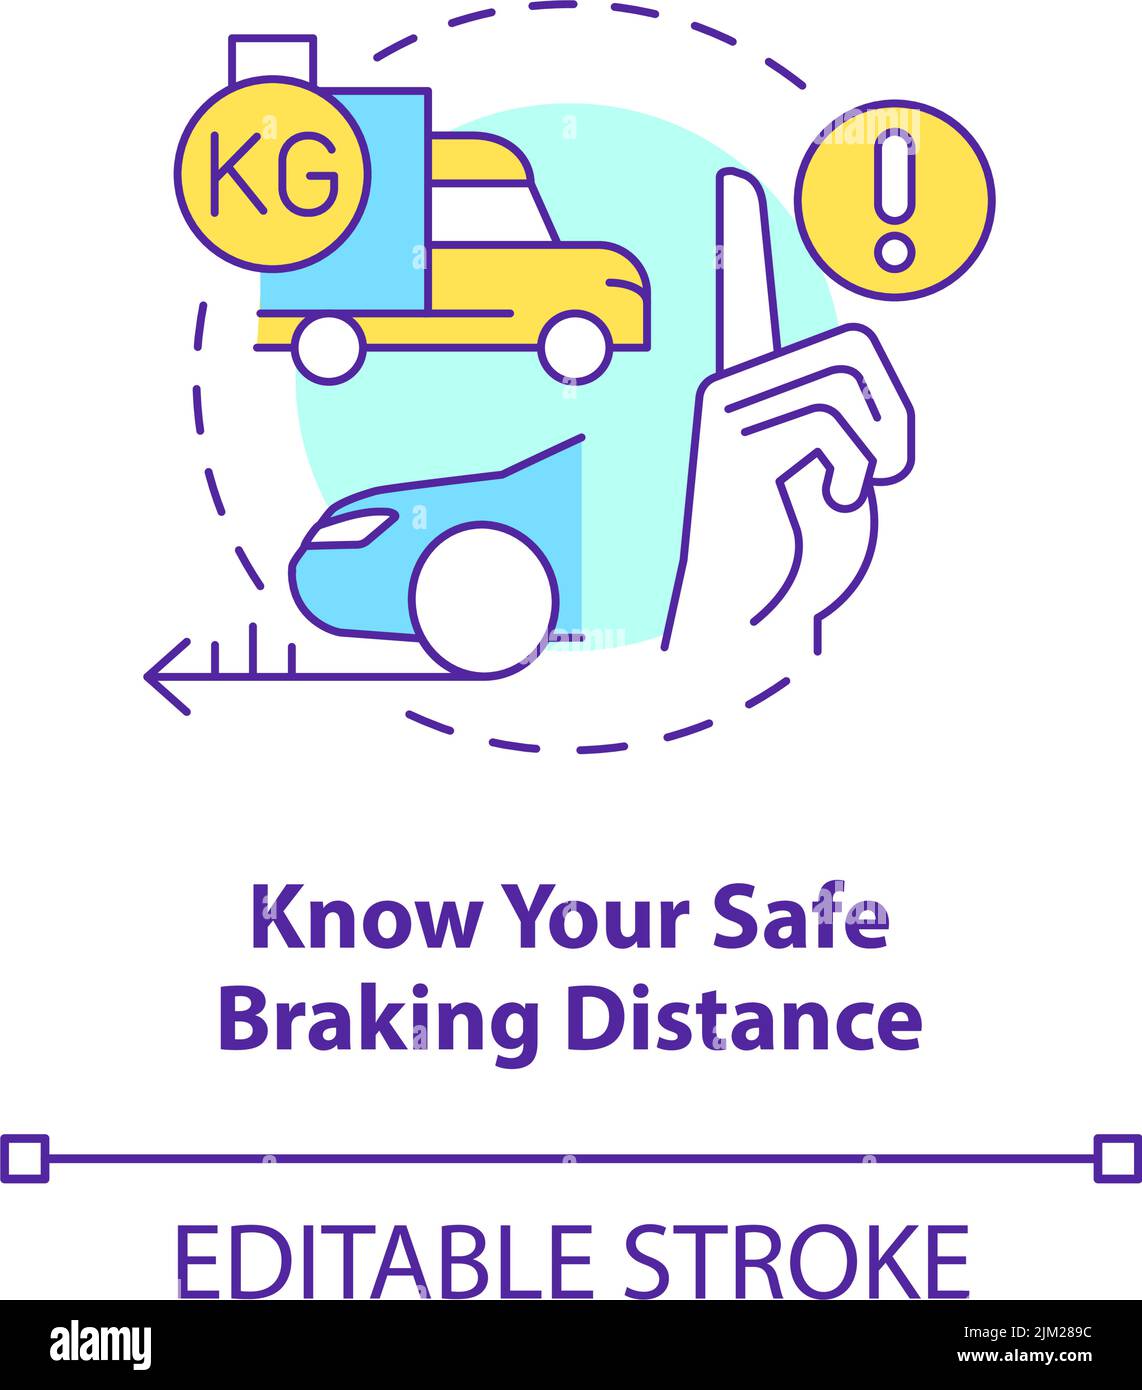 Know your safe braking distance concept icon Stock Vector